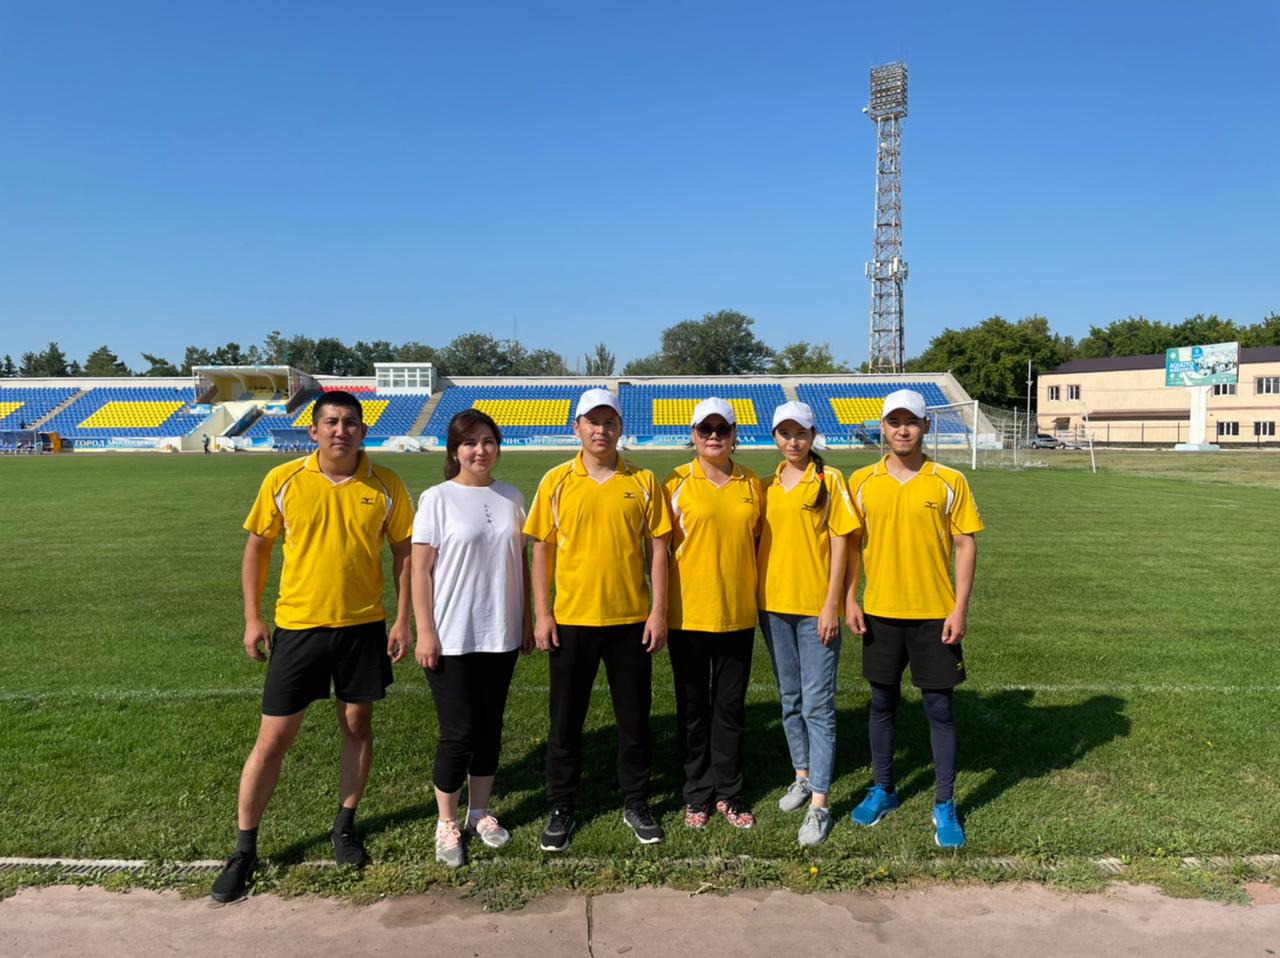 The Management team passed the tests of the First President of the Republic of Kazakhstan – the Leader of the Nation in summer sports